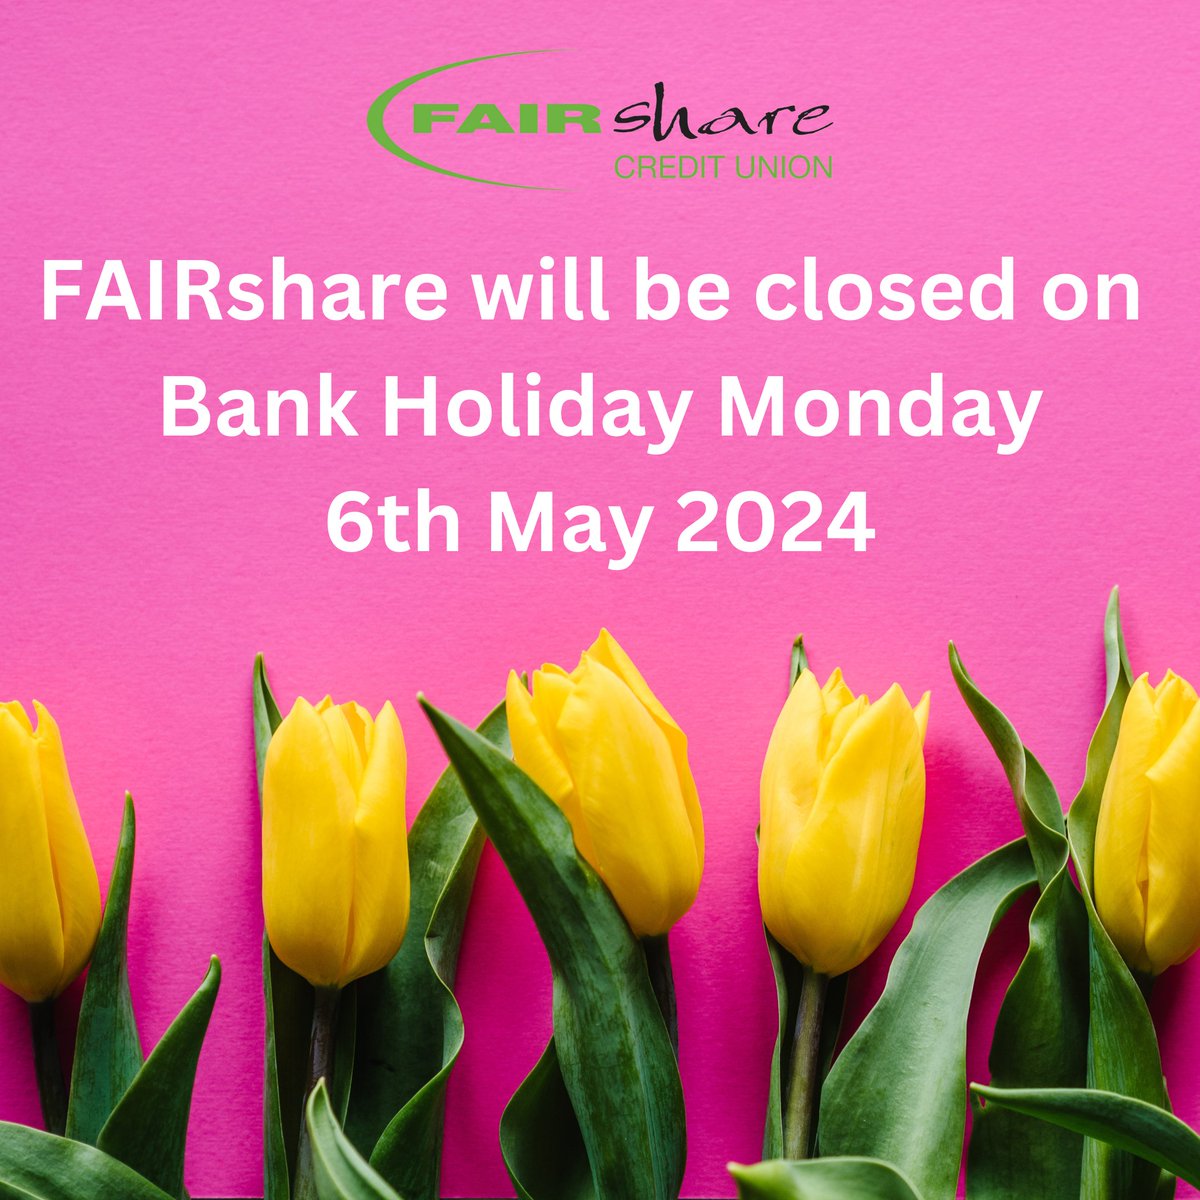 Enjoy the Bank Holiday! ☀️Our online services remain open fairshare.uk.com 😀Our branch at Southwater @TelfordCentre will reopen on Tuesday 2pm to 4pm.